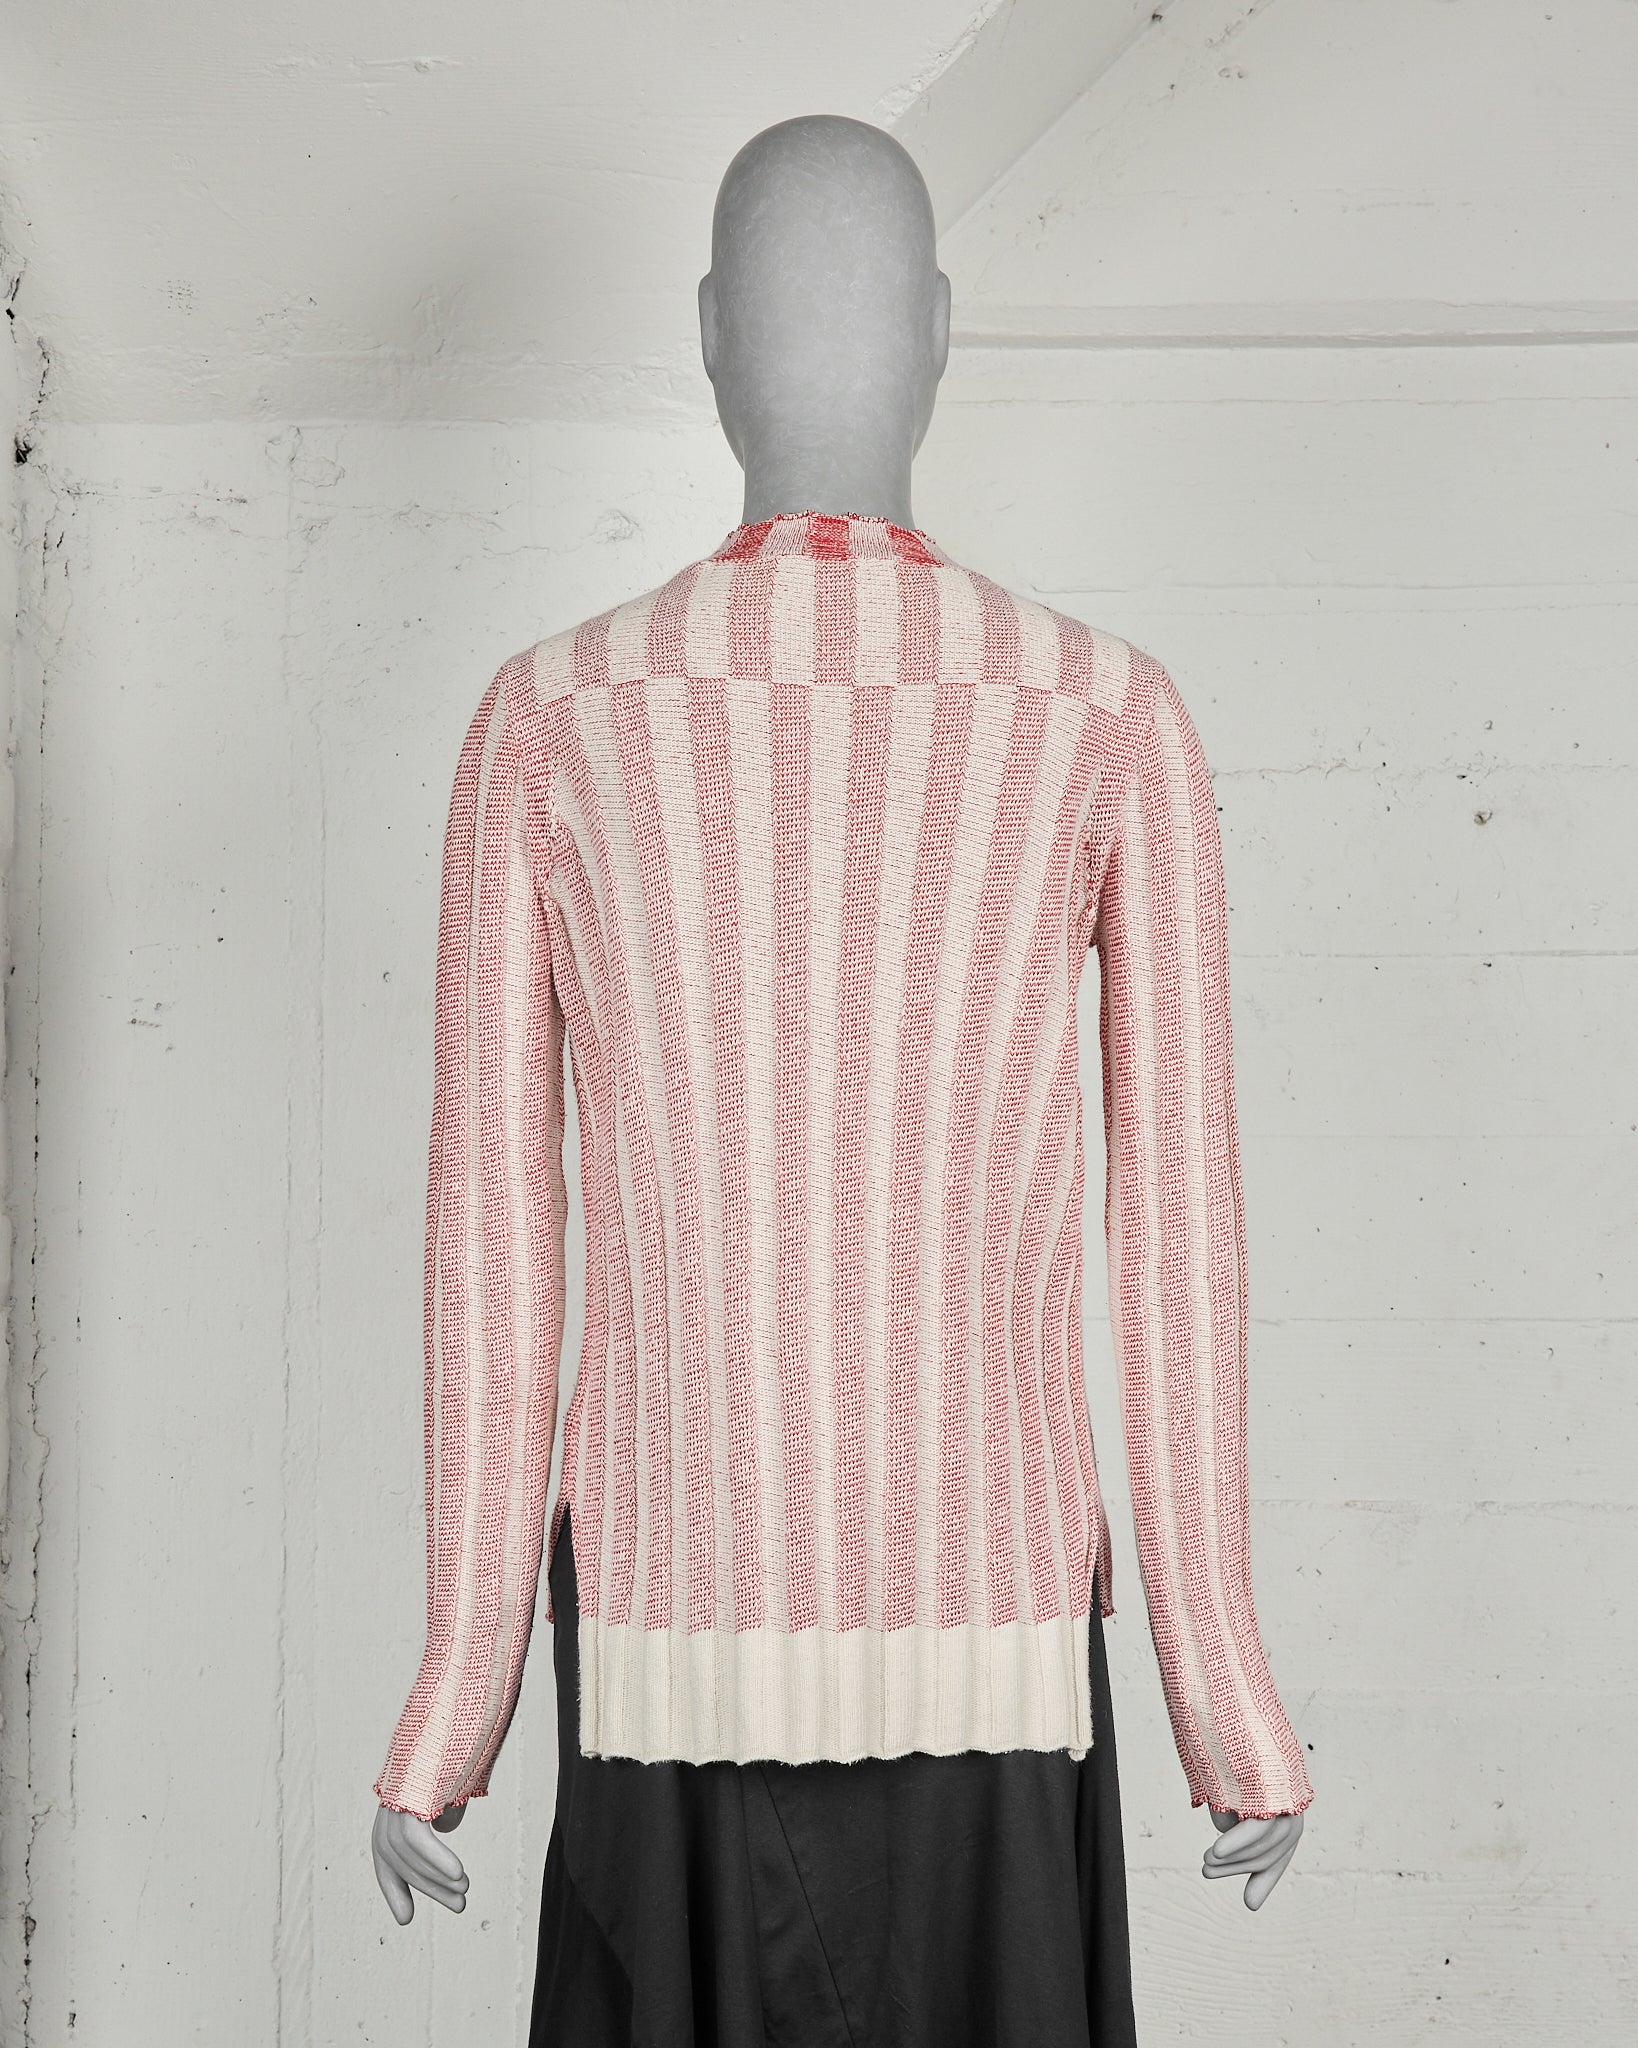 Celine by Phoebe Philo Red Striped Turtleneck - SS17 - SILVER LEAGUE